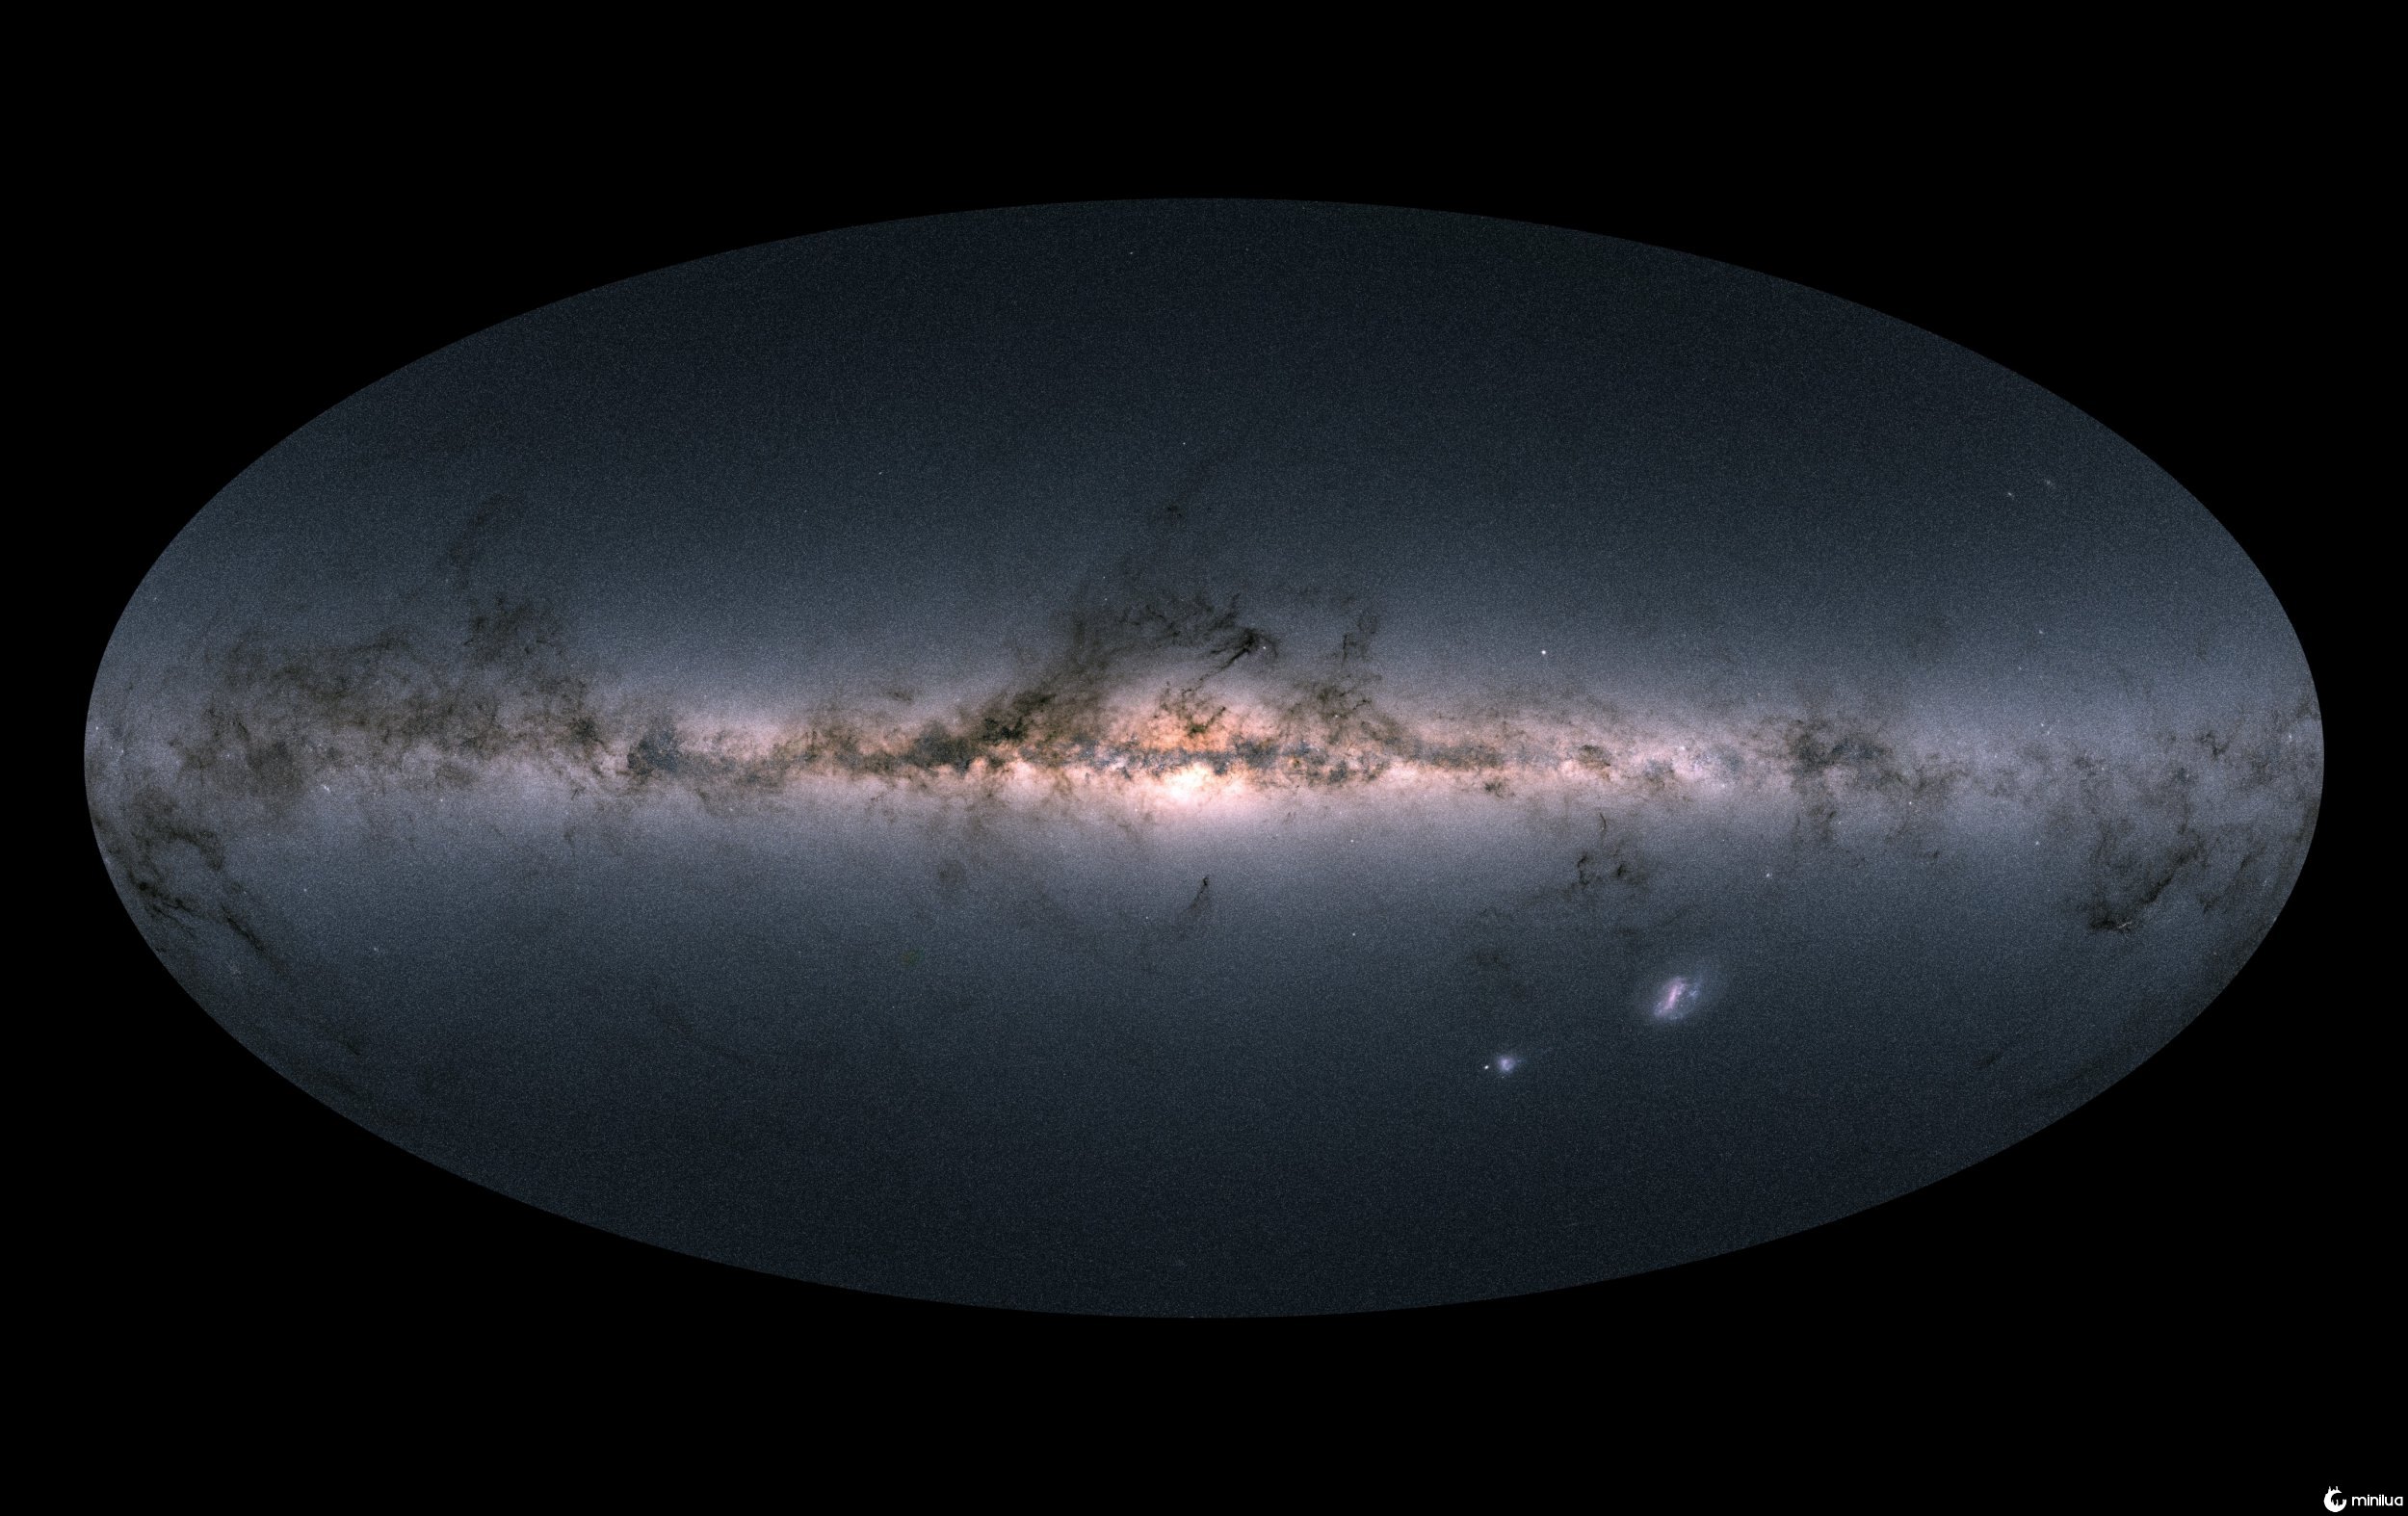 2 October 2018 A team of astronomers using the latest set of data from ESA?s Gaia mission to look for high-velocity stars being kicked out of the Milky Way were surprised to find stars instead sprinting inwards ? perhaps from another galaxy. In April, ESA?s stellar surveyor Gaia released an unprecedented catalogue of more than one billion stars. Astronomers across the world have been working ceaselessly over the past few months to explore this extraordinary dataset, scrutinising the properties and motions of stars in our Galaxy and beyond with never before achieved precision, giving rise to a multitude of new and intriguing studies. The Milky Way contains over a hundred billion stars. Most are located in a disc with a dense, bulging centre, at the middle of which is a supermassive black hole. The rest are spread out in a much larger spherical halo. Stars circle around the Milky Way at hundreds of kilometres per second, and their motions contain a wealth of information about the past history of the Galaxy. The fastest class of stars in our Galaxy are called hypervelocity stars, which are thought to start their life near the Galactic centre to be later flung towards the edge of the Milky Way via interactions with the black hole. Only a small number of hypervelocity stars have ever been discovered, and Gaia?s recently published second data release provides a unique opportunity to look for more of them. All-sky view from Gaia's second data release Several groups of astronomers jumped into the brand-new dataset in search of hypervelocity stars immediately after the release. Among them, three scientists at Leiden University, the Netherlands, were in for a big surprise. For 1.3 billion stars, Gaia measured positions, parallaxes ? an indicator of their distance ? and 2D motions on the plane of the sky. For seven million of the brightest ones, it also measured how quickly they move towards or away from us. ?Of the seven million Gaia stars with full 3D velocity measurements, we found twenty that could be travelling fast enough to eventually escape from the Milky Way,? explains Elena Maria Rossi, one of the authors of the new study. Elena and colleagues, who had already discovered a handful of hypervelocity stars last year in an exploratory study based on data from Gaia's first release, were pleasantly surprised, as they were hoping to find at most one star breaking loose from the Galaxy among these seven million. And there is more. ?Rather than flying away from the Galactic centre, most of the high velocity stars we spotted seem to be racing towards it,? adds co-author Tommaso Marchetti. ?These could be stars from another galaxy, zooming right through the Milky Way.? Large Magellanic Cloud It is possible that these intergalactic interlopers come from the Large Magellanic Cloud, a relatively small galaxy orbiting the Milky Way, or they may originate from a galaxy even further afield. If that is the case, they carry the imprint of their site of origin, and studying them at much closer distances than their parent galaxy could provide unprecedented information on the nature of stars in another galaxy ? similar in a way to studying martian material brought to our planet by meteorites. ?Stars can be accelerated to high velocities when they interact with a supermassive black hole,? Elena explains. ?So the presence of these stars might be a sign of such black holes in nearby galaxies. But the stars may also have once been part of a binary system, flung towards the Milky Way when their companion star exploded as a supernova. Either way, studying them could tell us more about these kinds of processes in nearby galaxies.? An alternative explanation is that the newly identified sprinting stars could be native to our Galaxy?s halo, accelerated and pushed inwards through interactions with one of the dwarf galaxies that fell towards the Milky Way during its build-up history. Additional information about the age and composition of the stars could help the astronomers clarify their origin. ?A star from the Milky Way halo is likely to be fairly old and mostly made of hydrogen, whereas stars from other galaxies could contain lots of heavier elements,? says Tommaso. ?Looking at the colours of stars tells us more about what they are made of.?